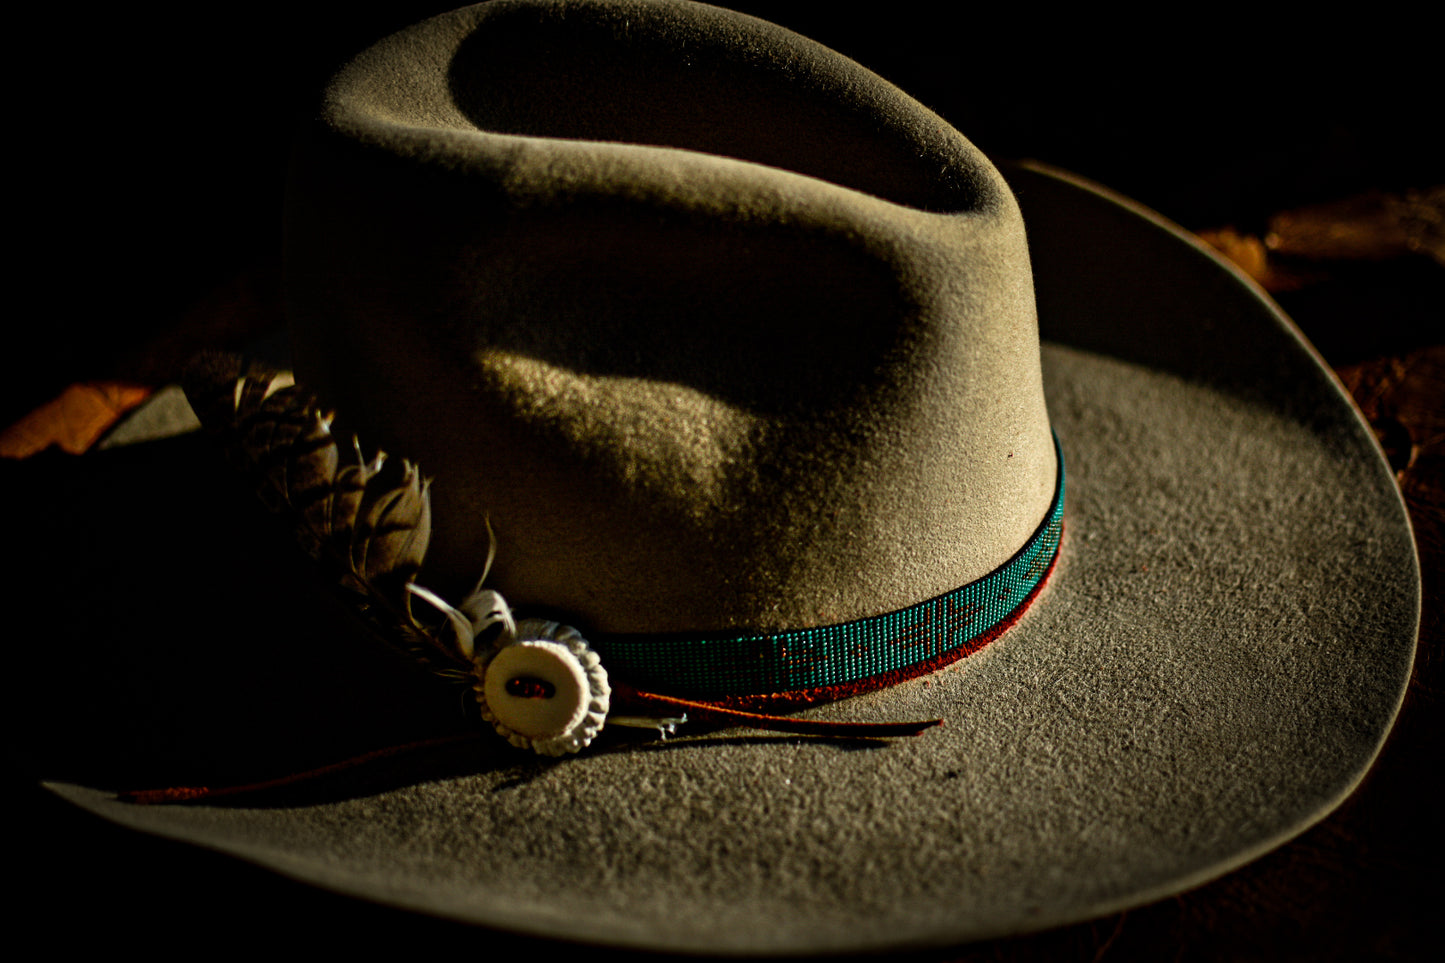 Hat Band — “Larch” in turquoise